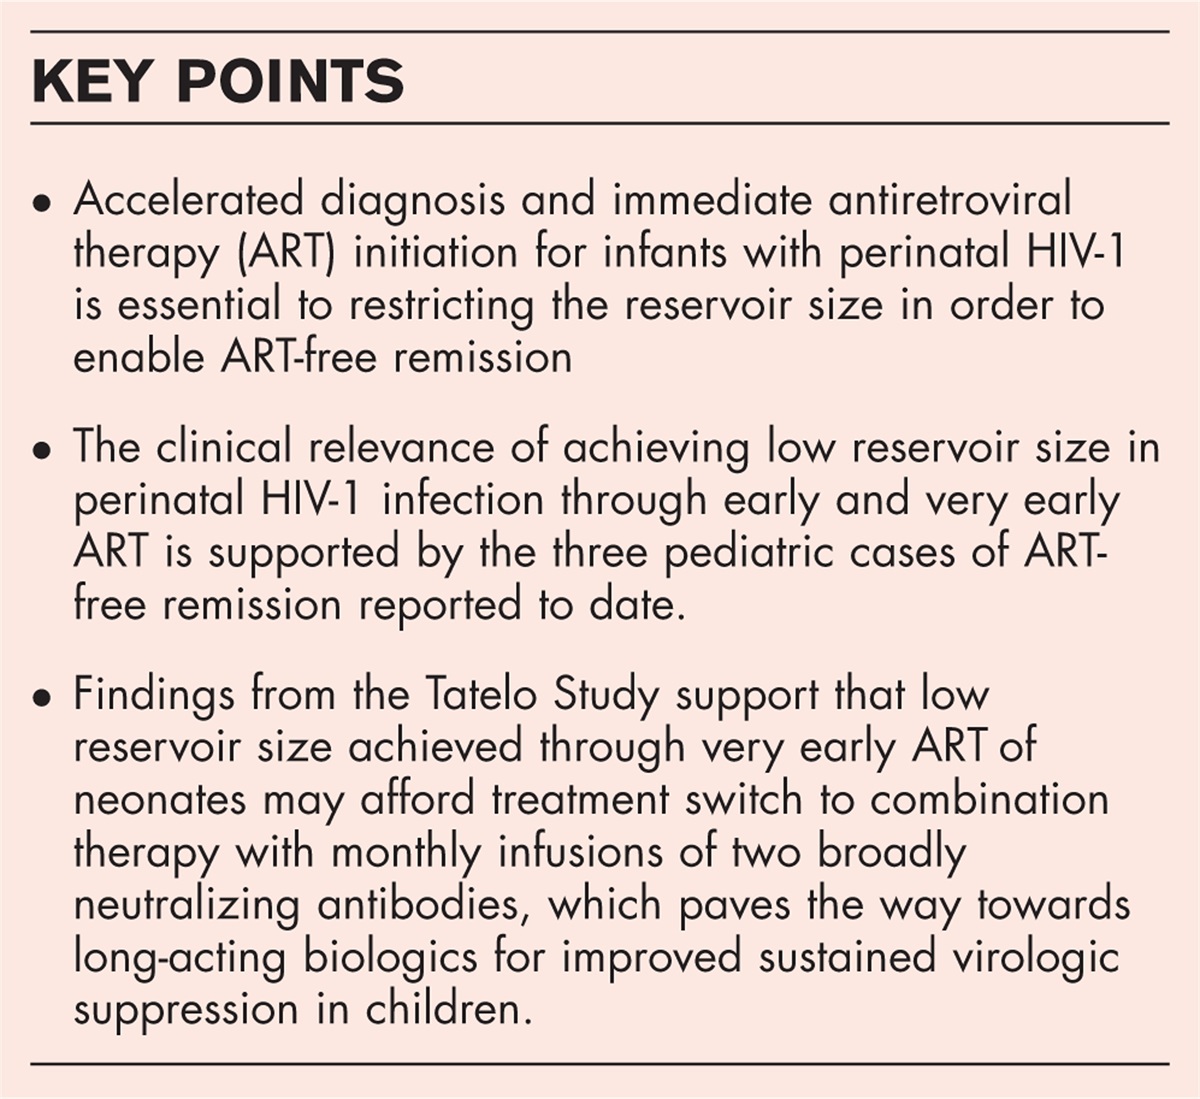 Age at ART initiation and proviral reservoir size in perinatal HIV-1 infection: considerations for ART-free remission